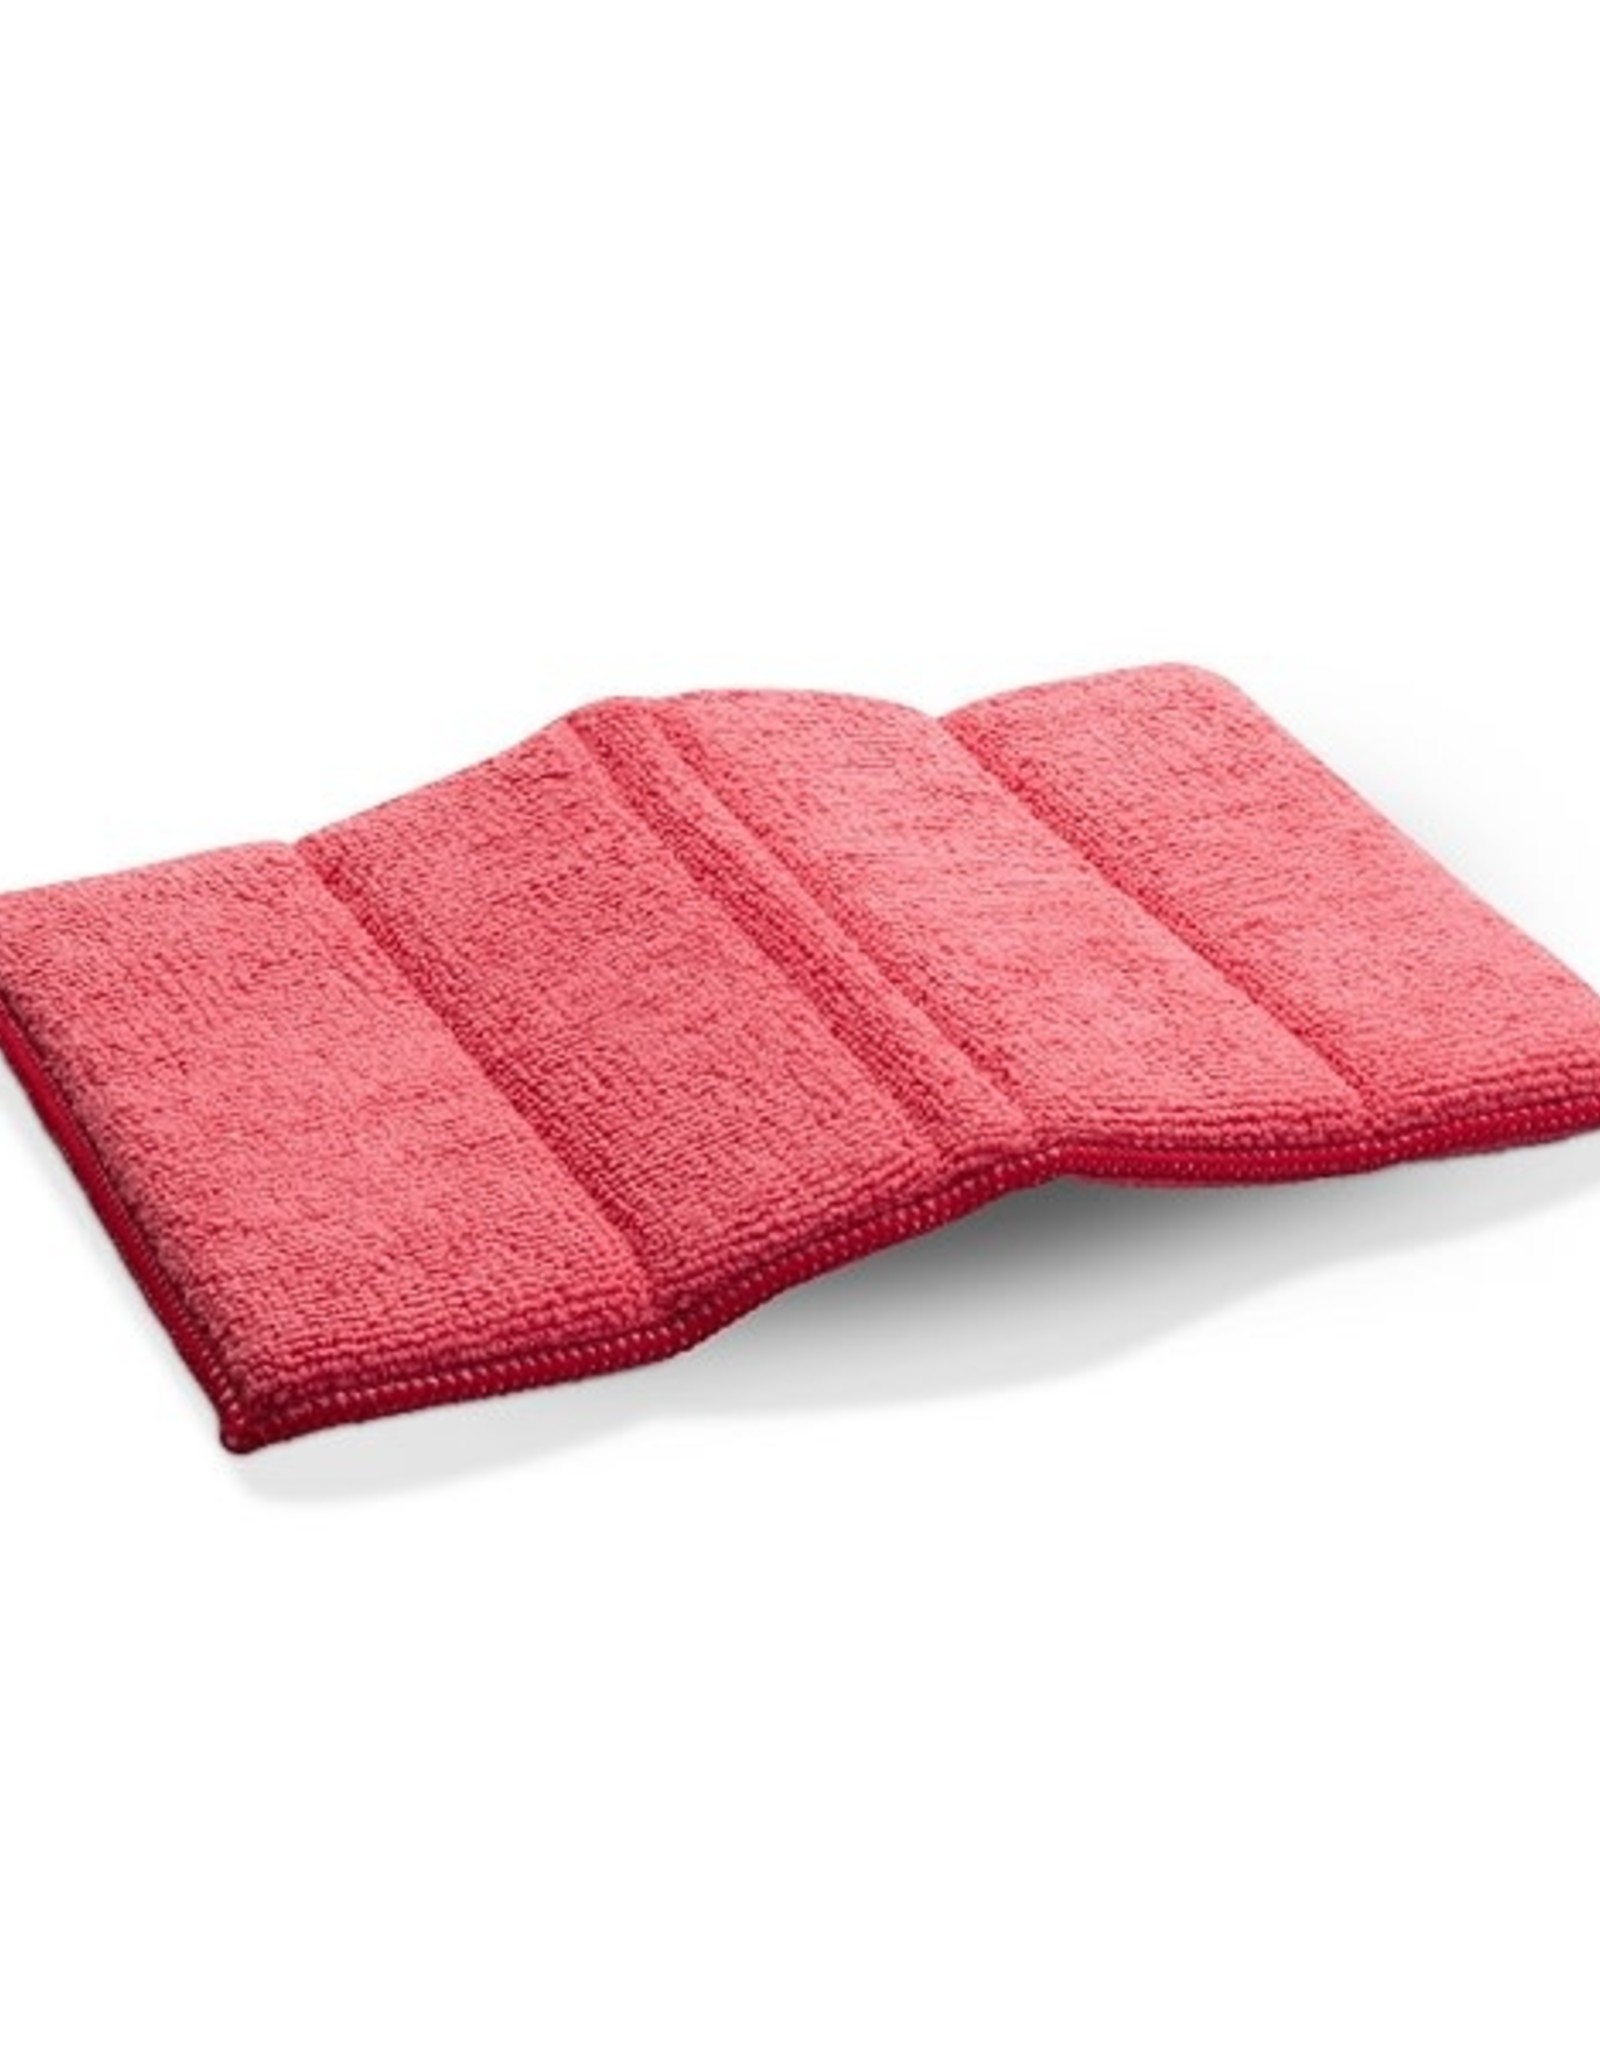 ECloth CLEANING PAD